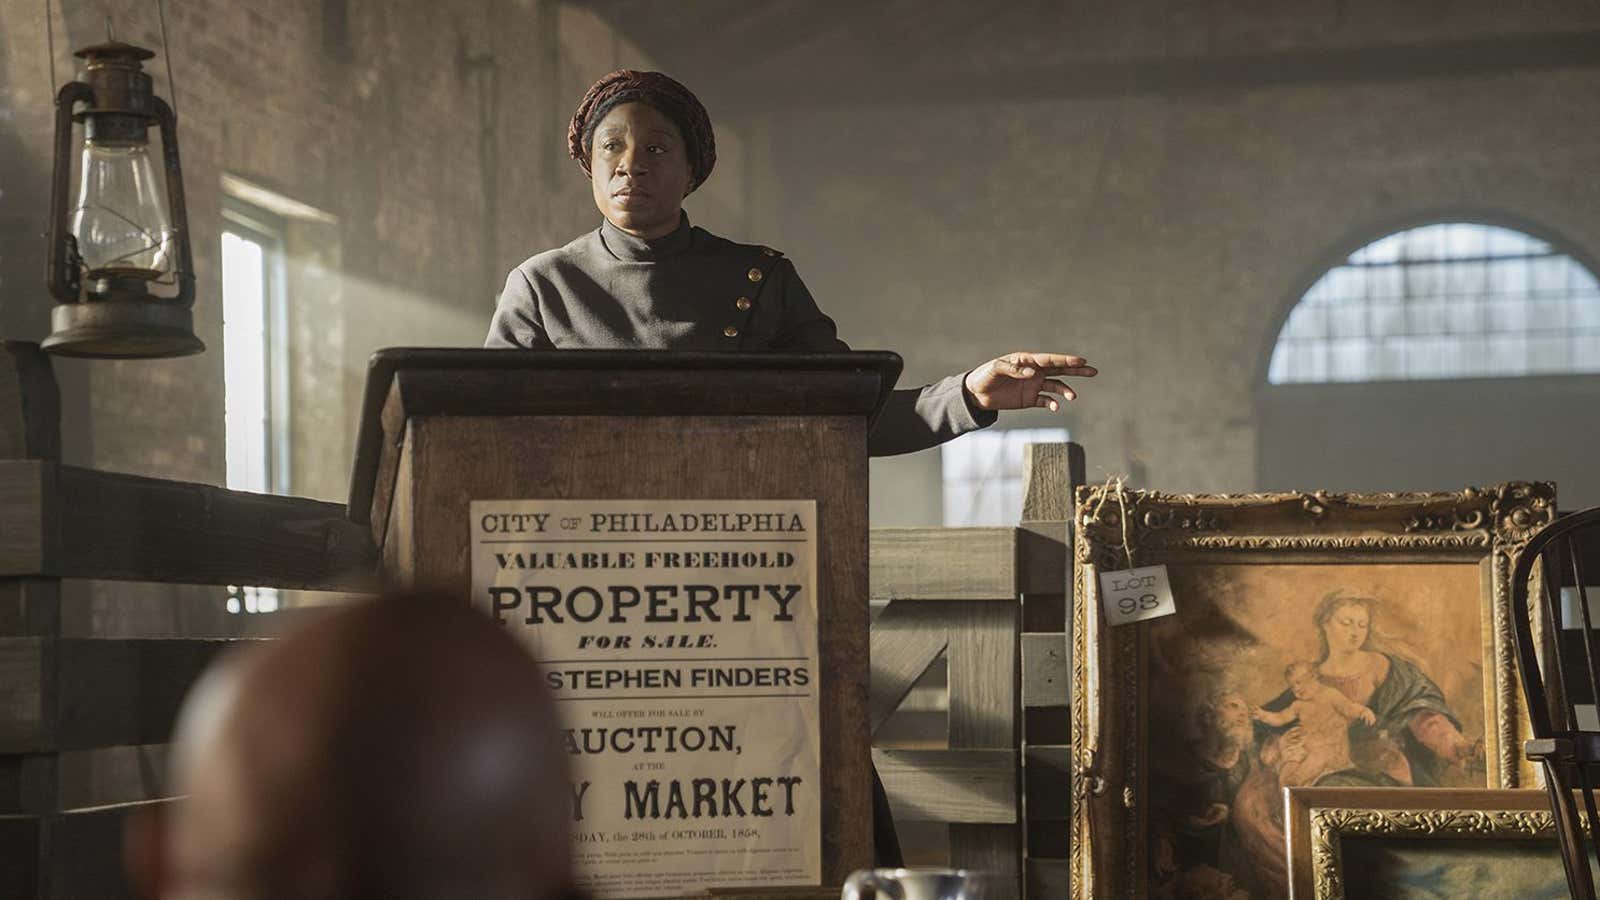 Bringing famed abolitionists like Harriet Tubman and Frederick Douglass to life was both wonderful and scary for costume designer Karyn Wagner.